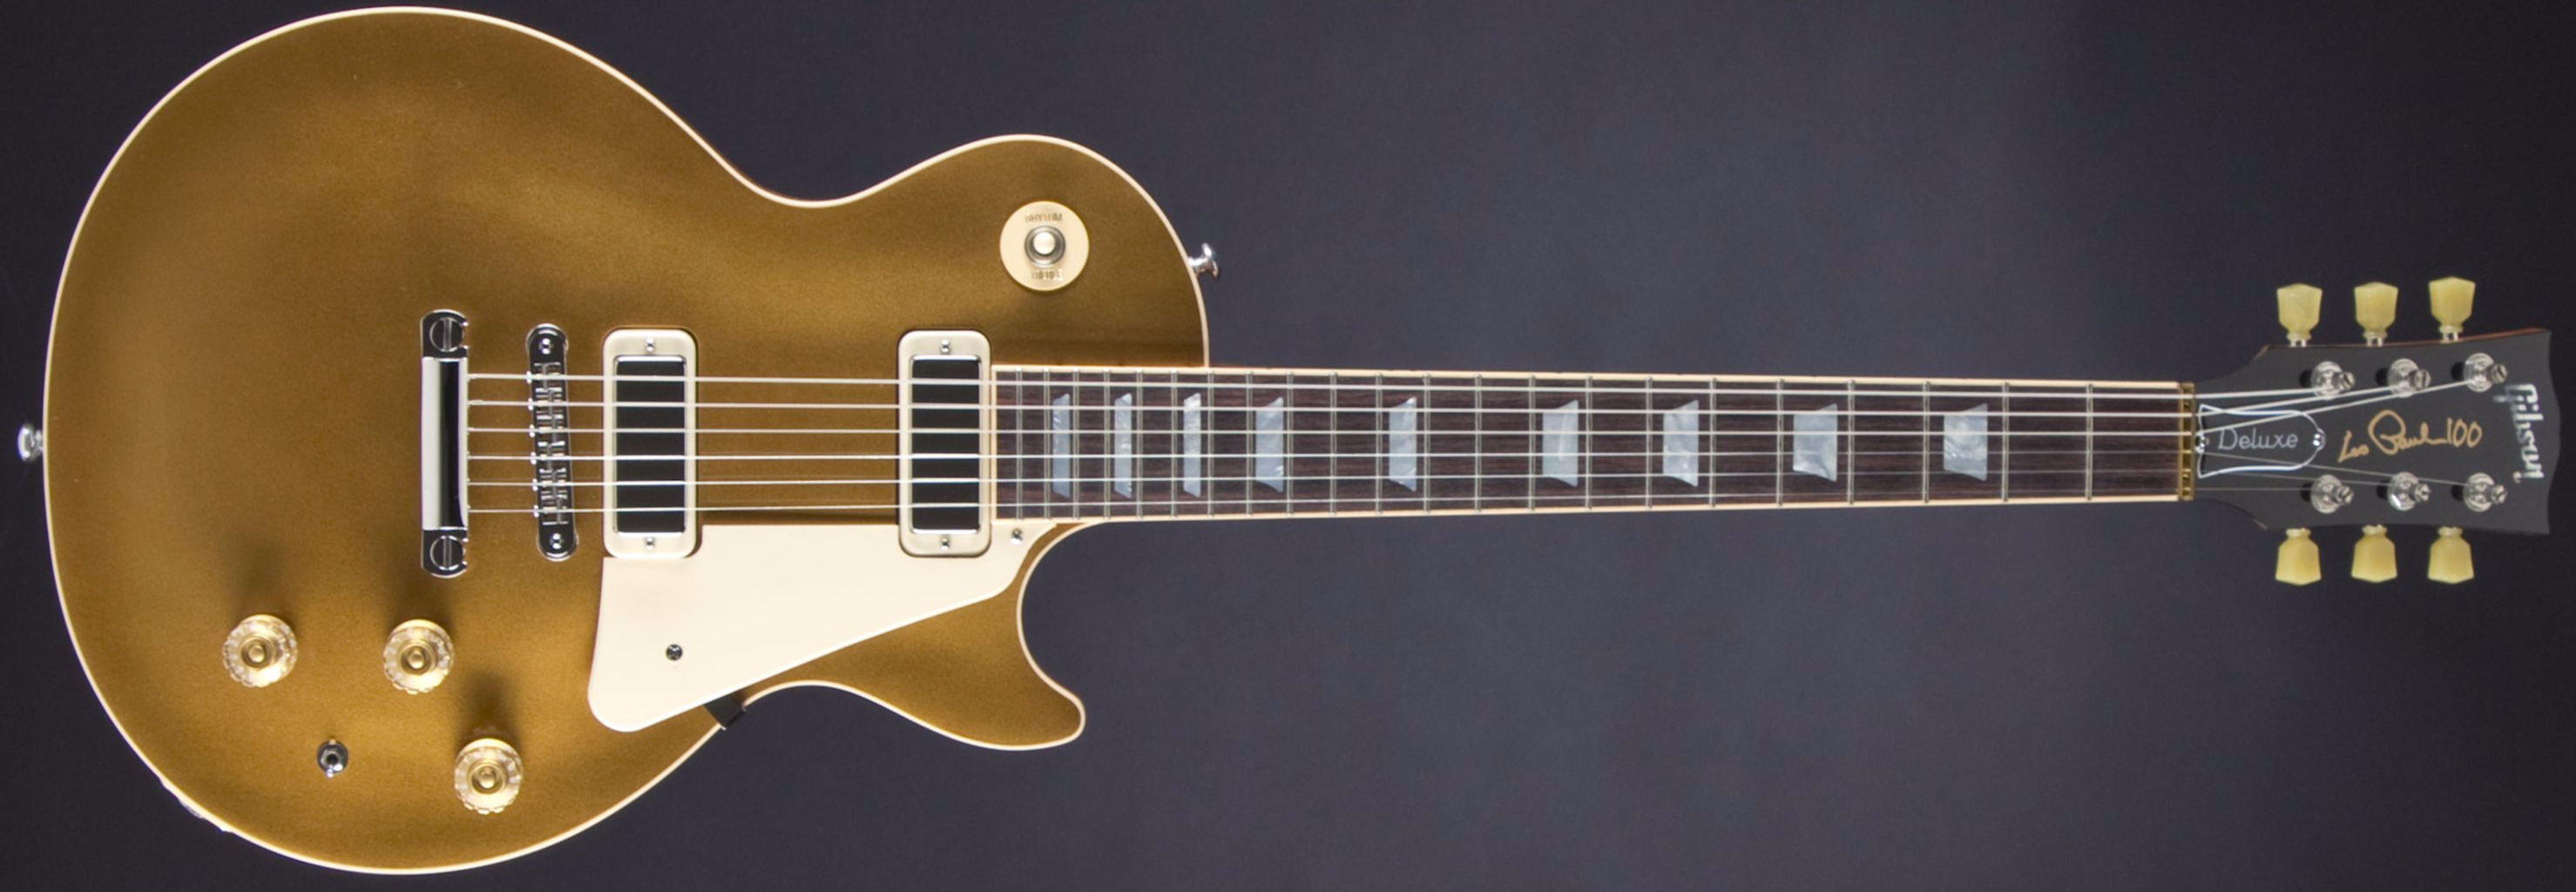 Gibson Les Paul Deluxe GT Metallic Goldtop | MUSIC STORE professional